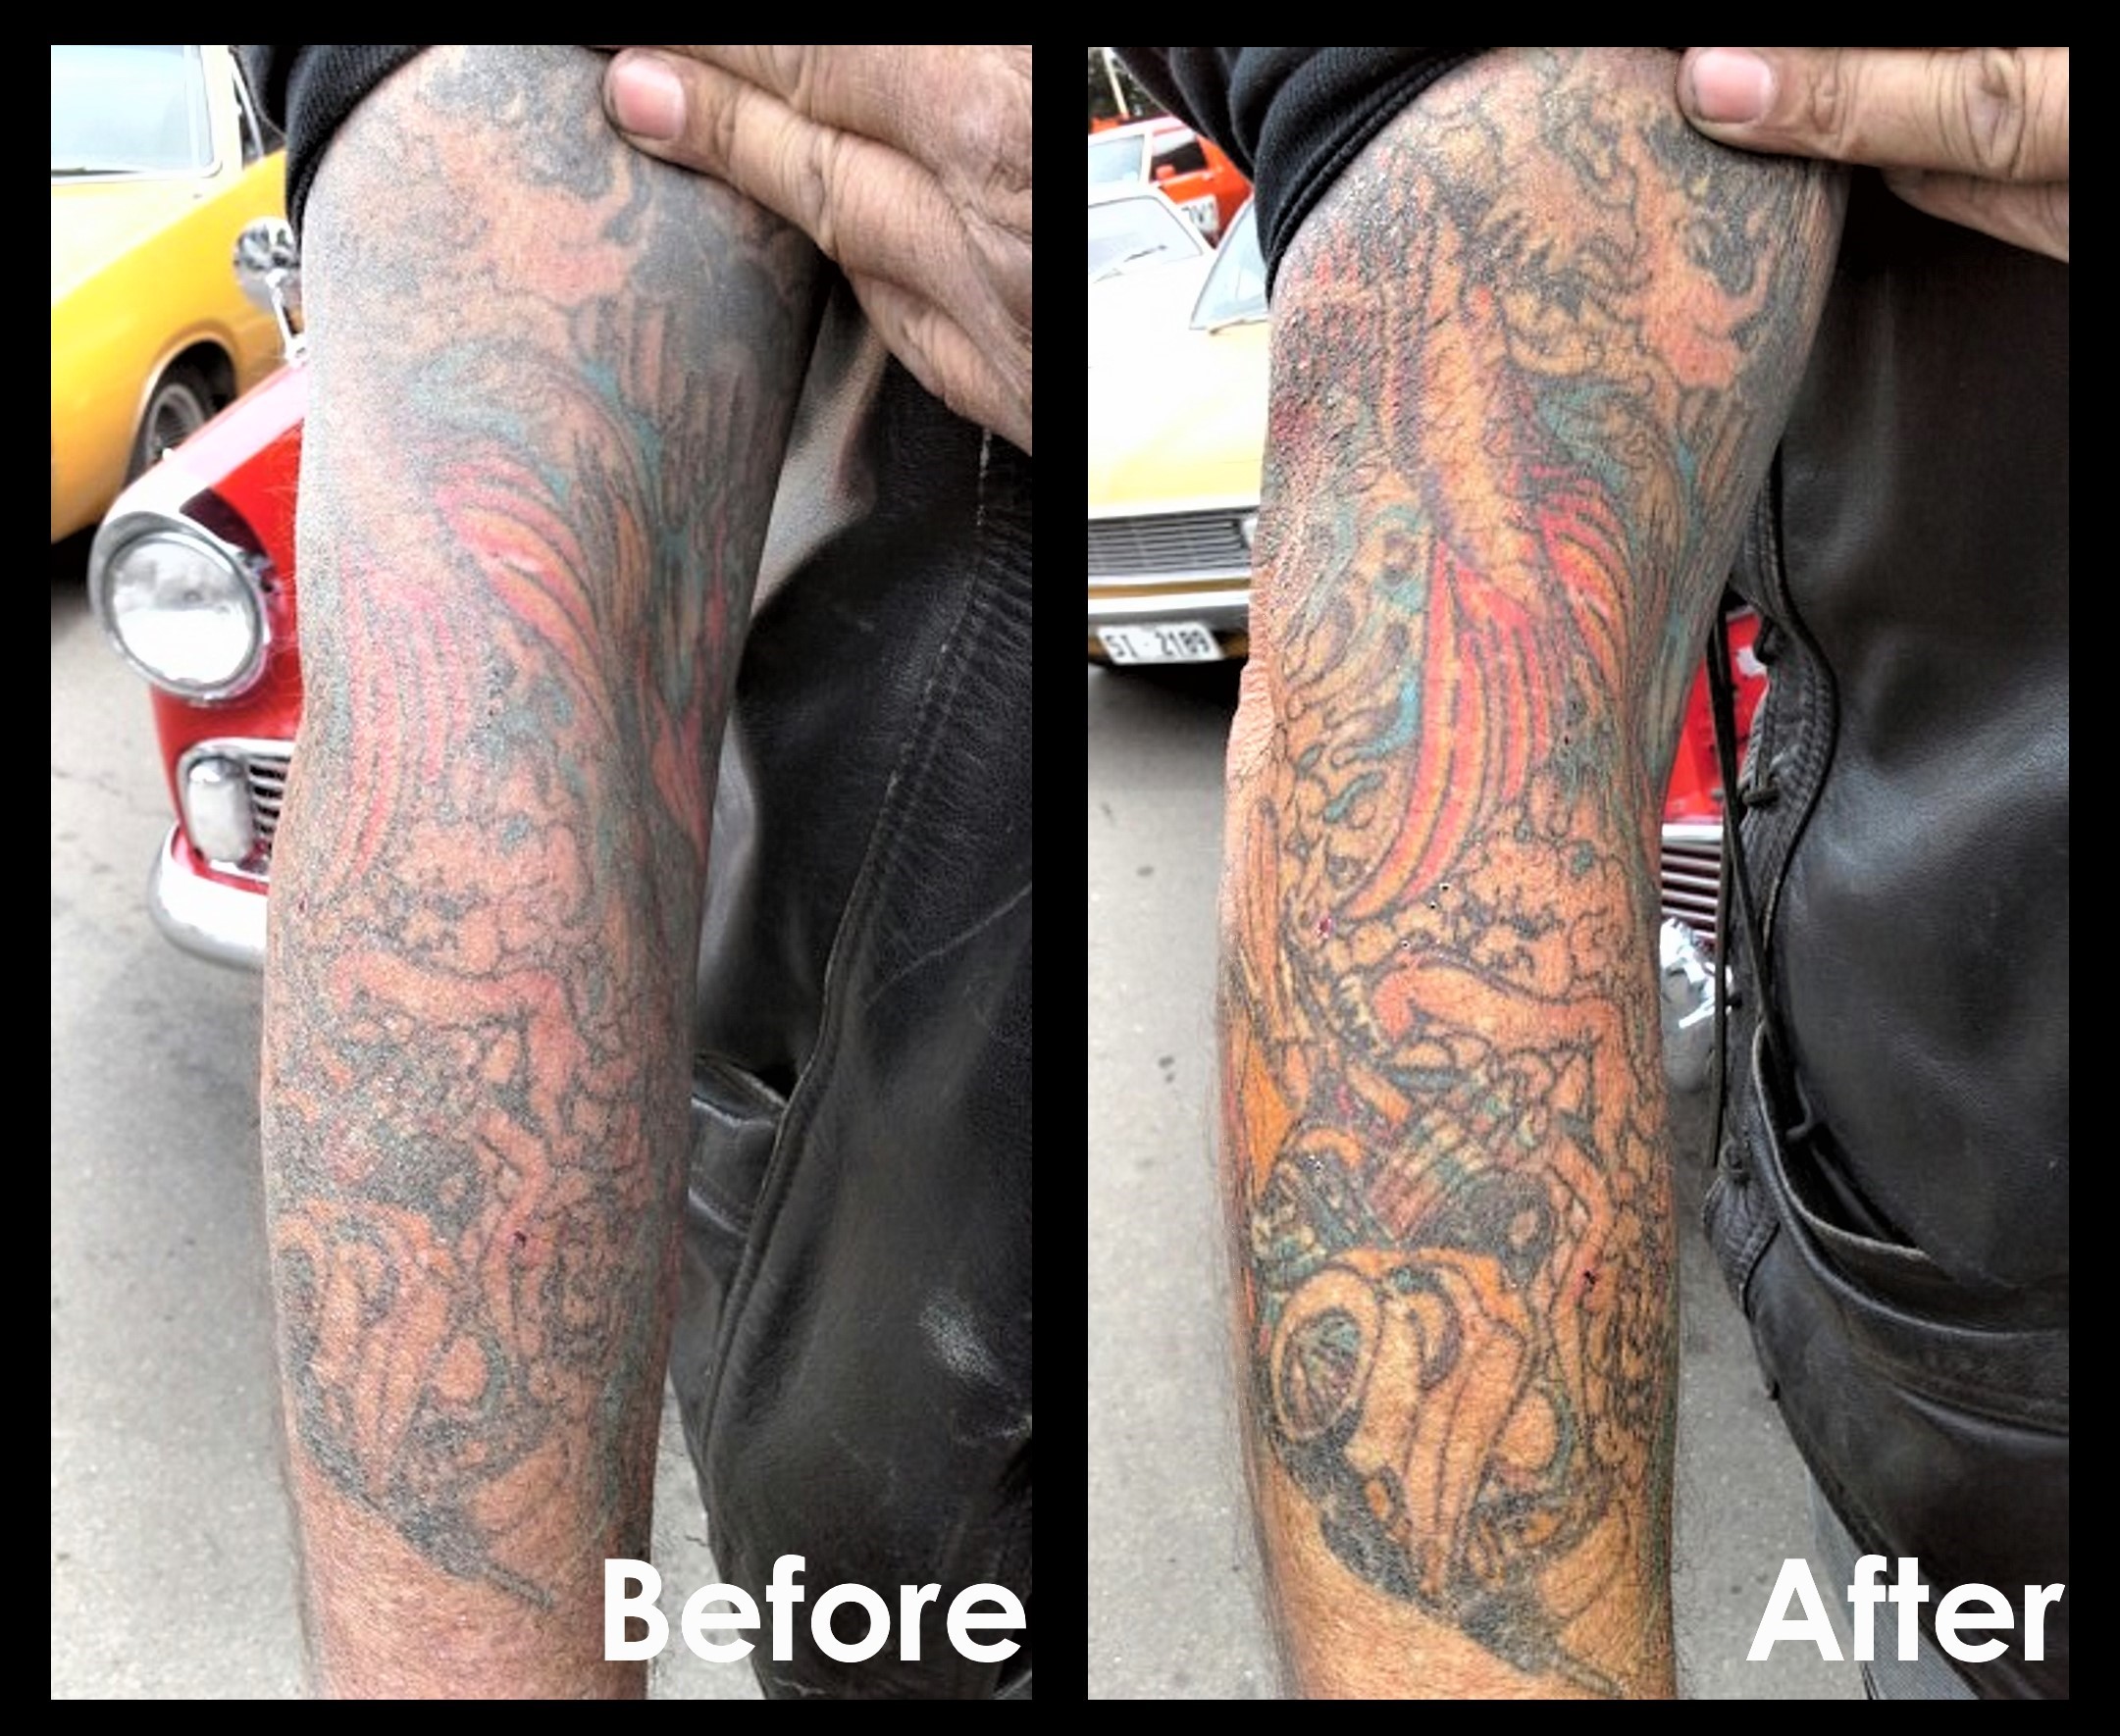 How To Take Care Of Your Tattoo After Getting Inked To Make It Last Longer  Without Infection